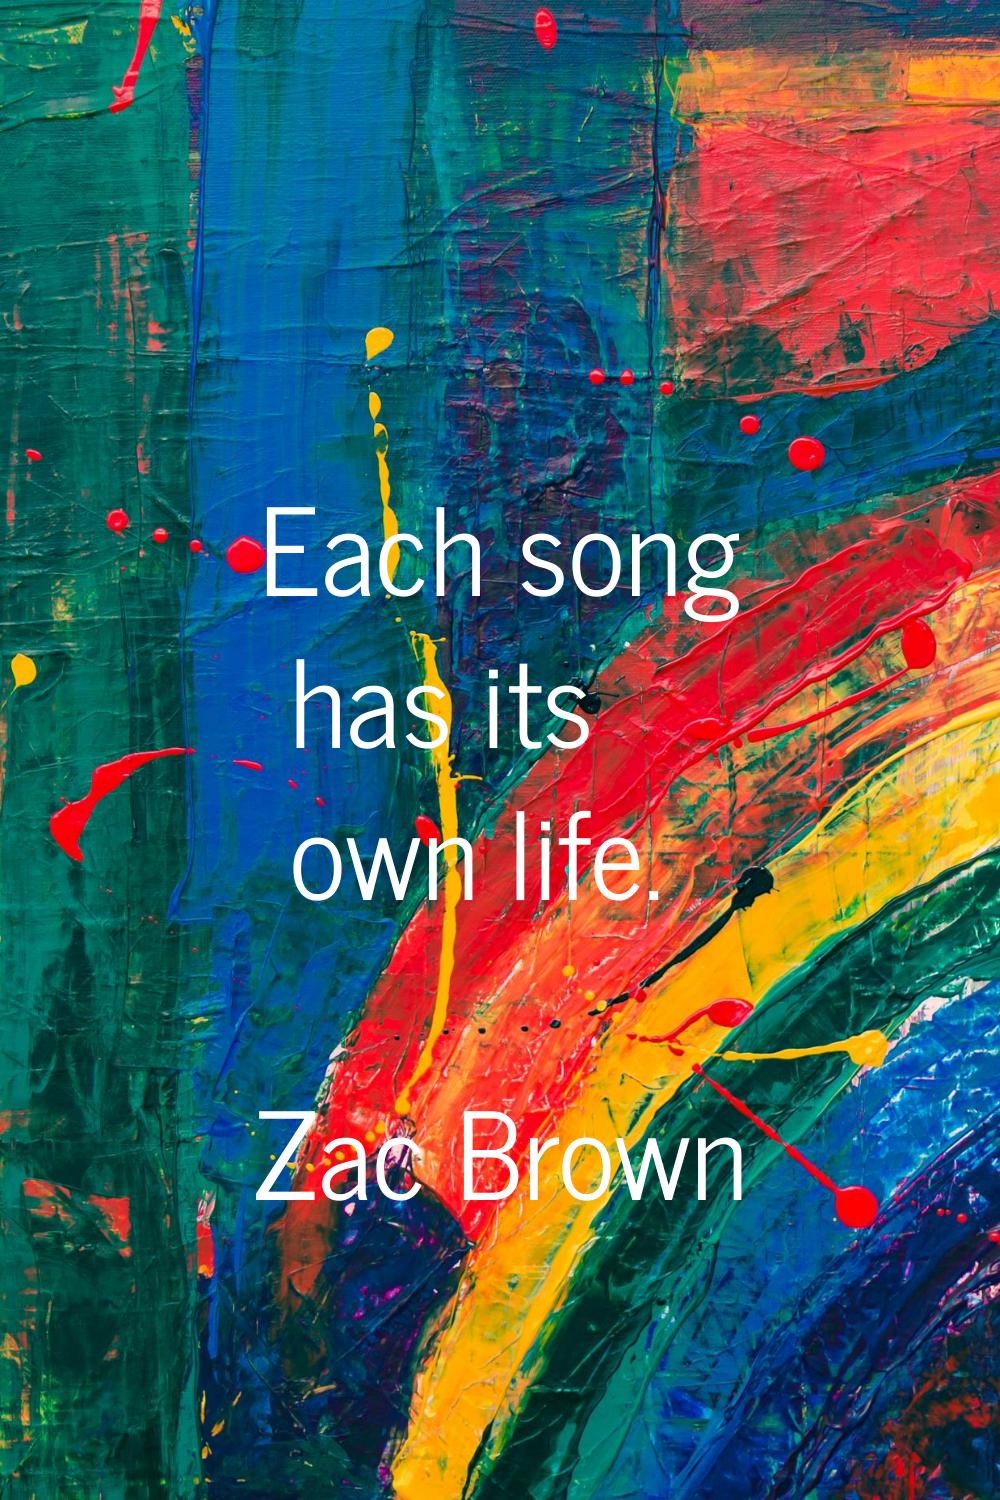 Each song has its own life.